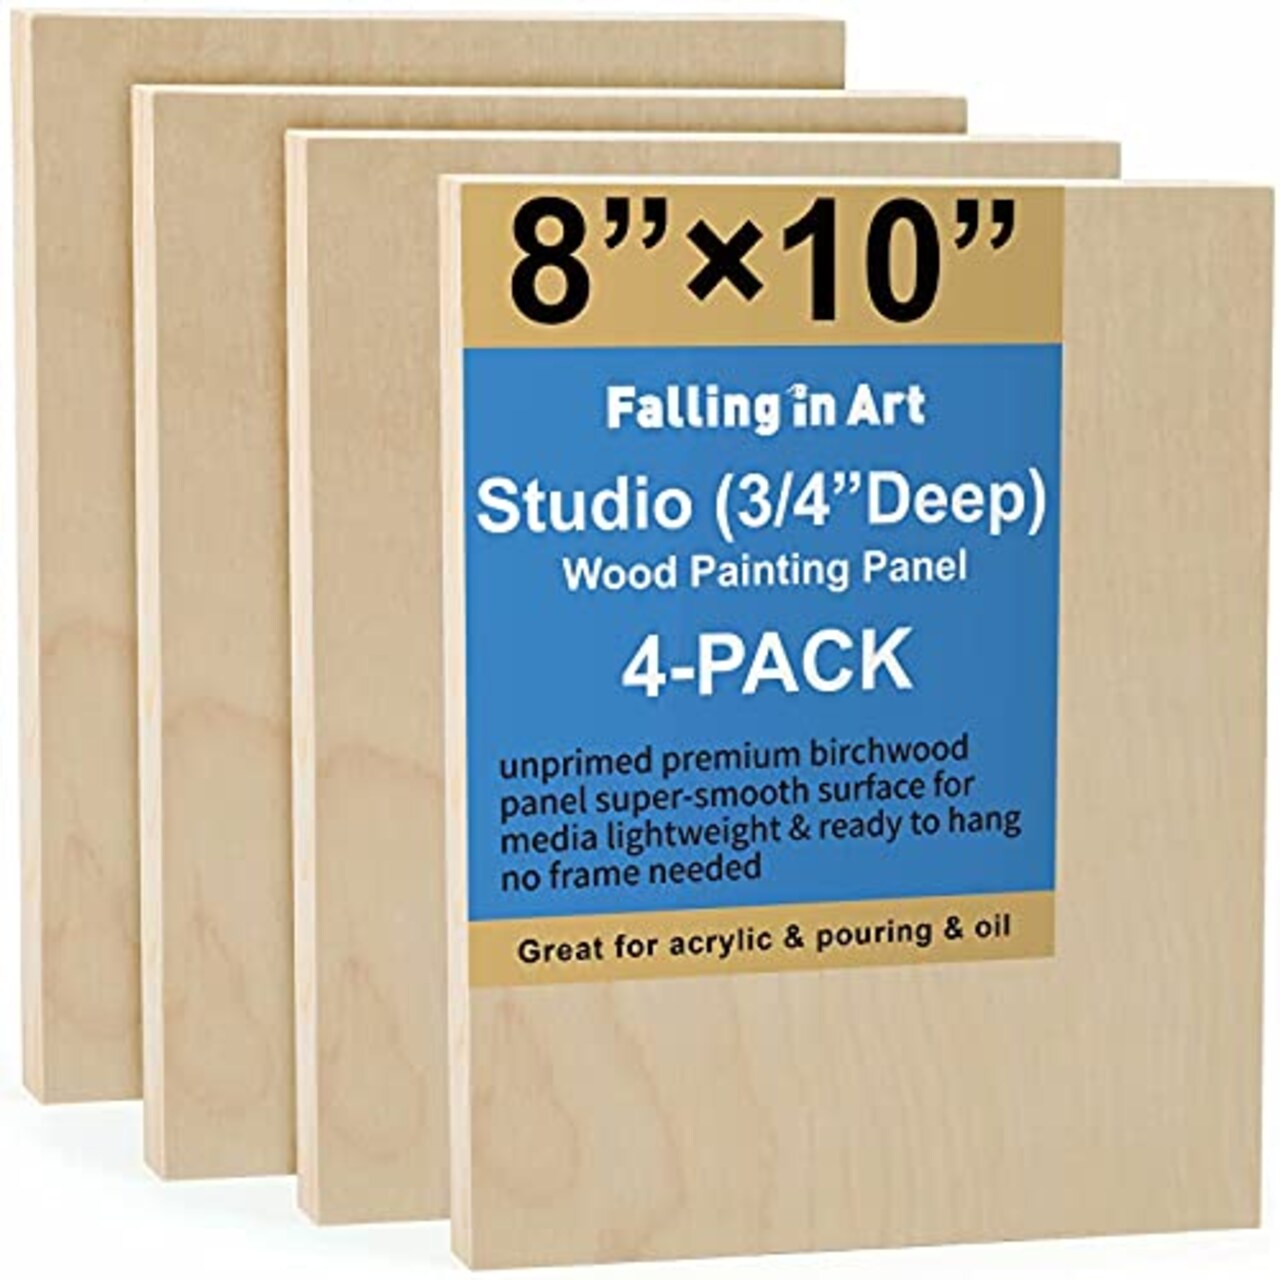 Unfinished Birch Wood Canvas Panels Kit, Falling in Art 4 Pack of 8x10''  Studio 3/4'' Deep Cradle Boards for Pouring Art, Crafts, Painting and More